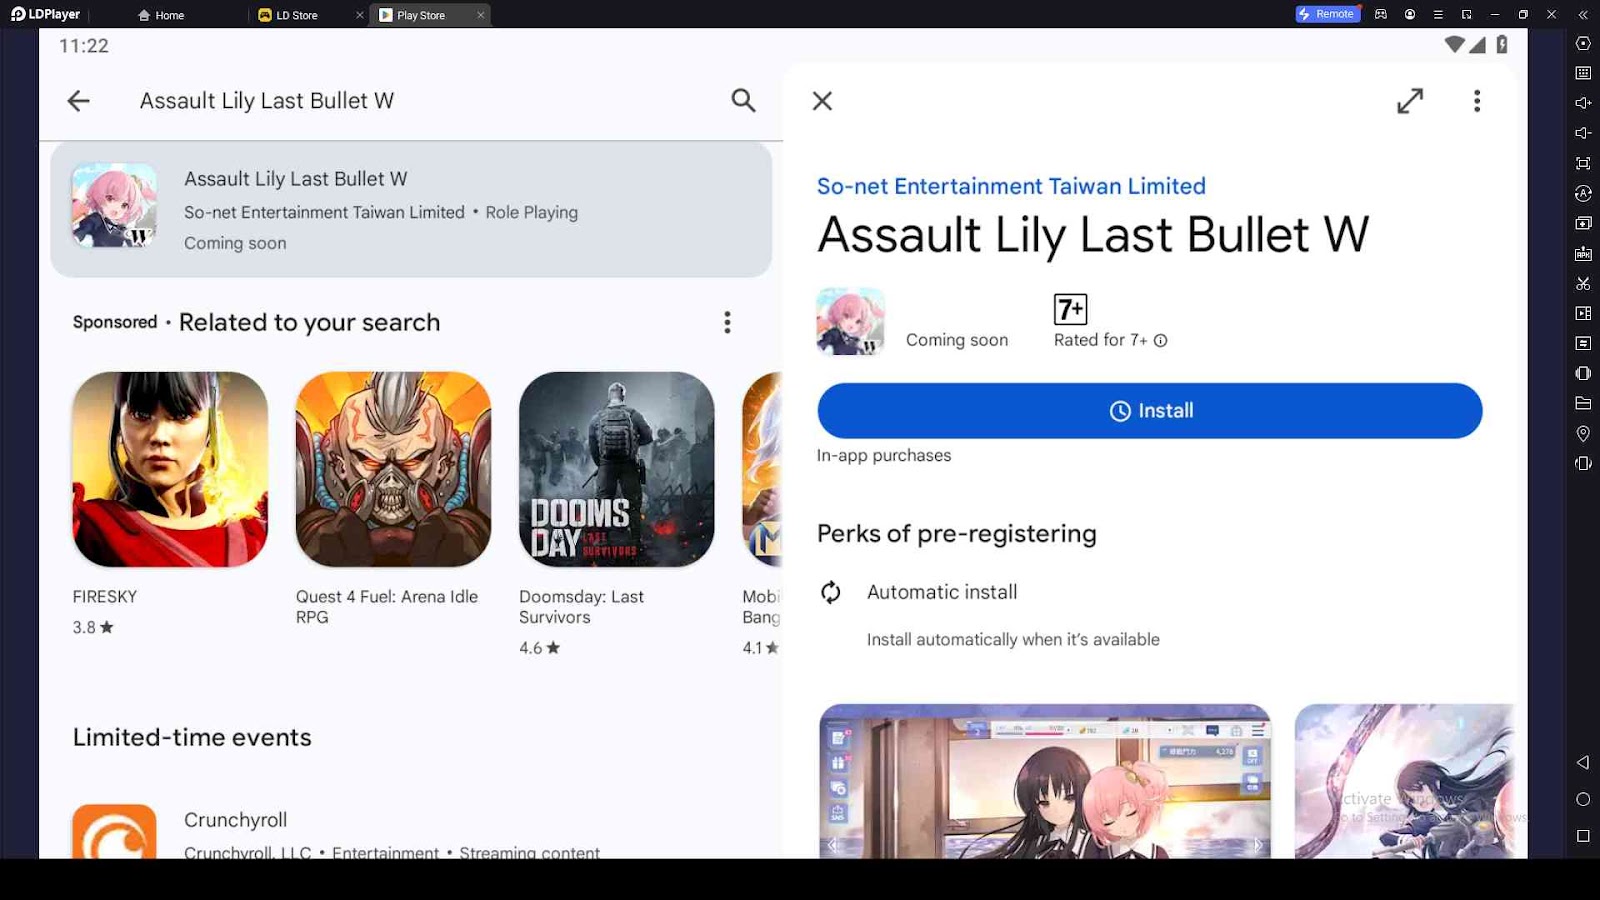 Playing Assault Lily Last Bullet W on PC with LDPlayer